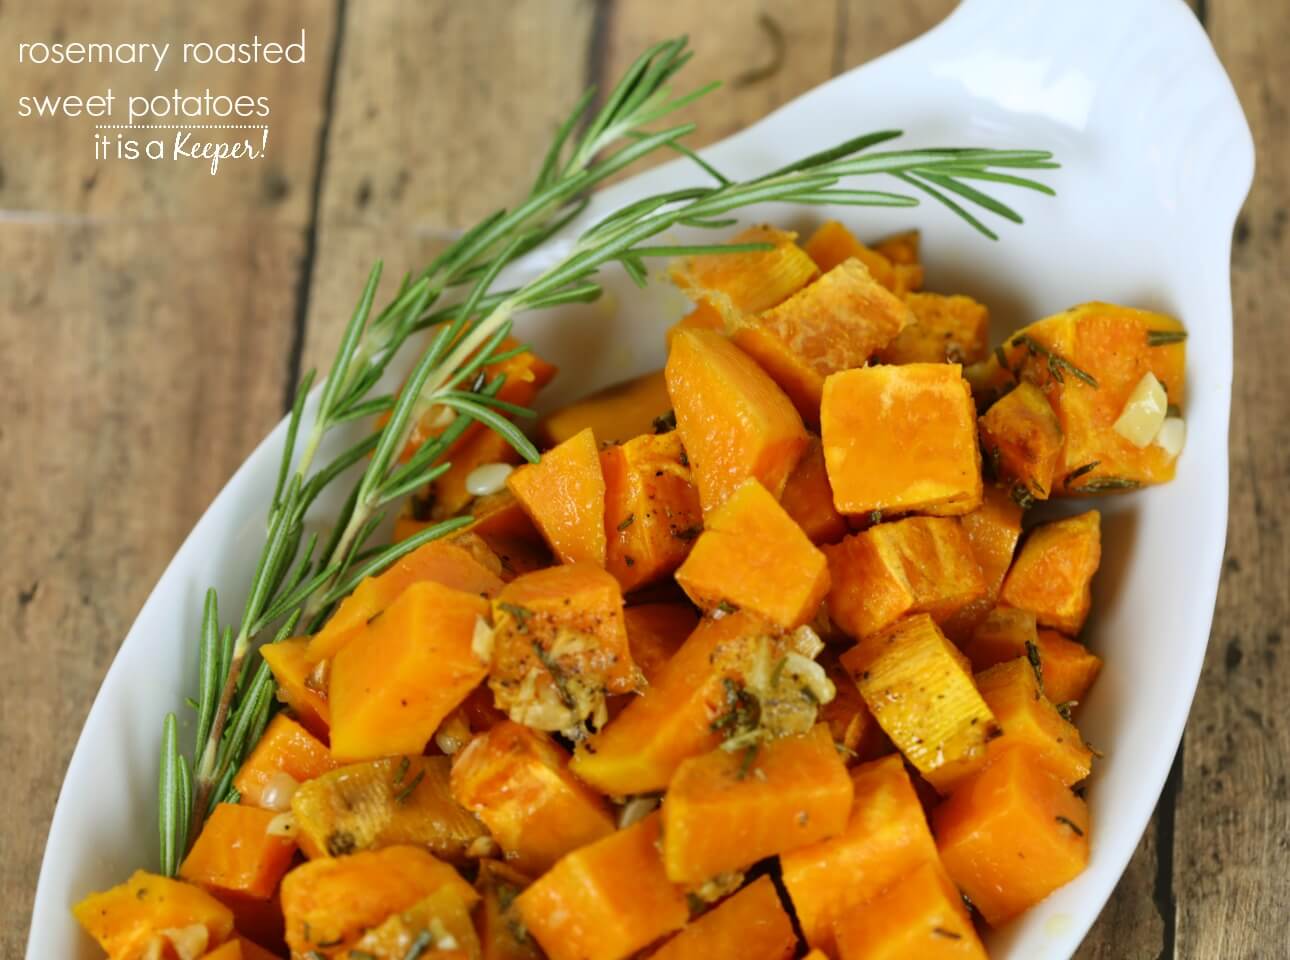 Rosemary Roasted Sweet Potatoes Recipe – an easy and delicious vegetable side dish C